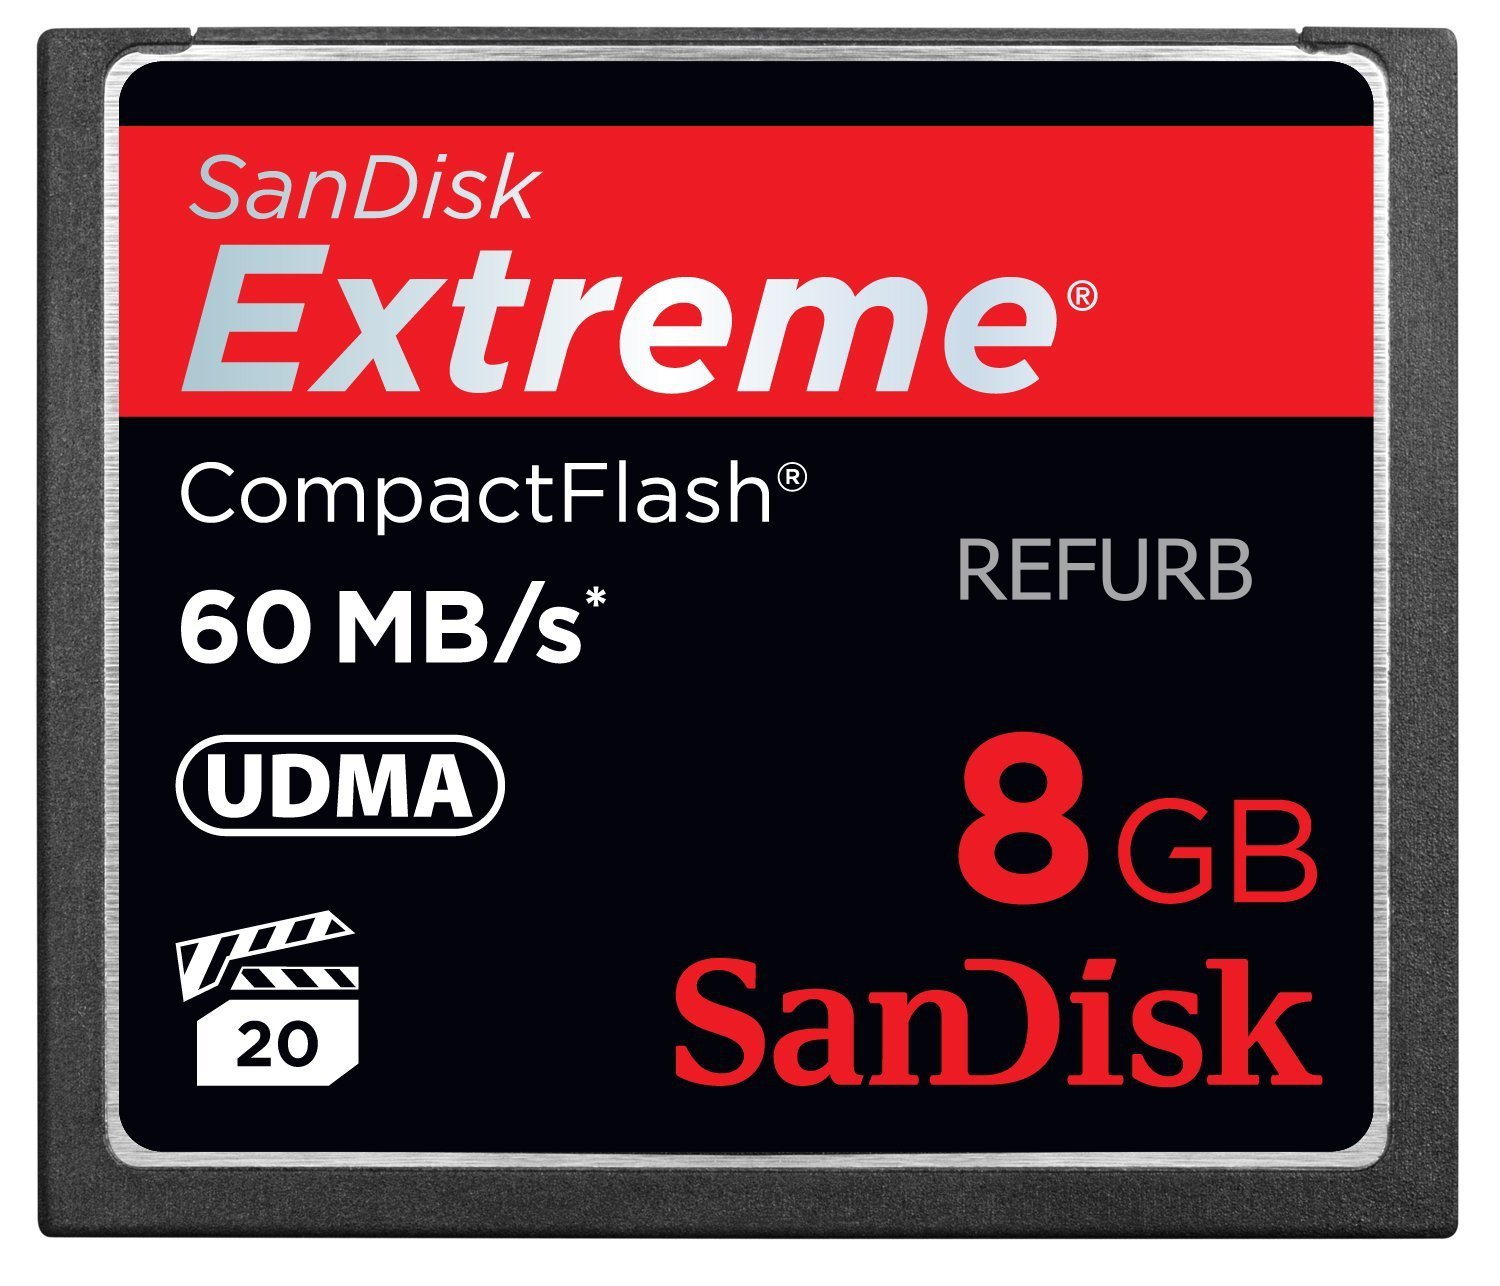 SanDisk Extreme 8GB CompactFlash CF Card SDCFX-008G-X46 (Certified Refurbished)